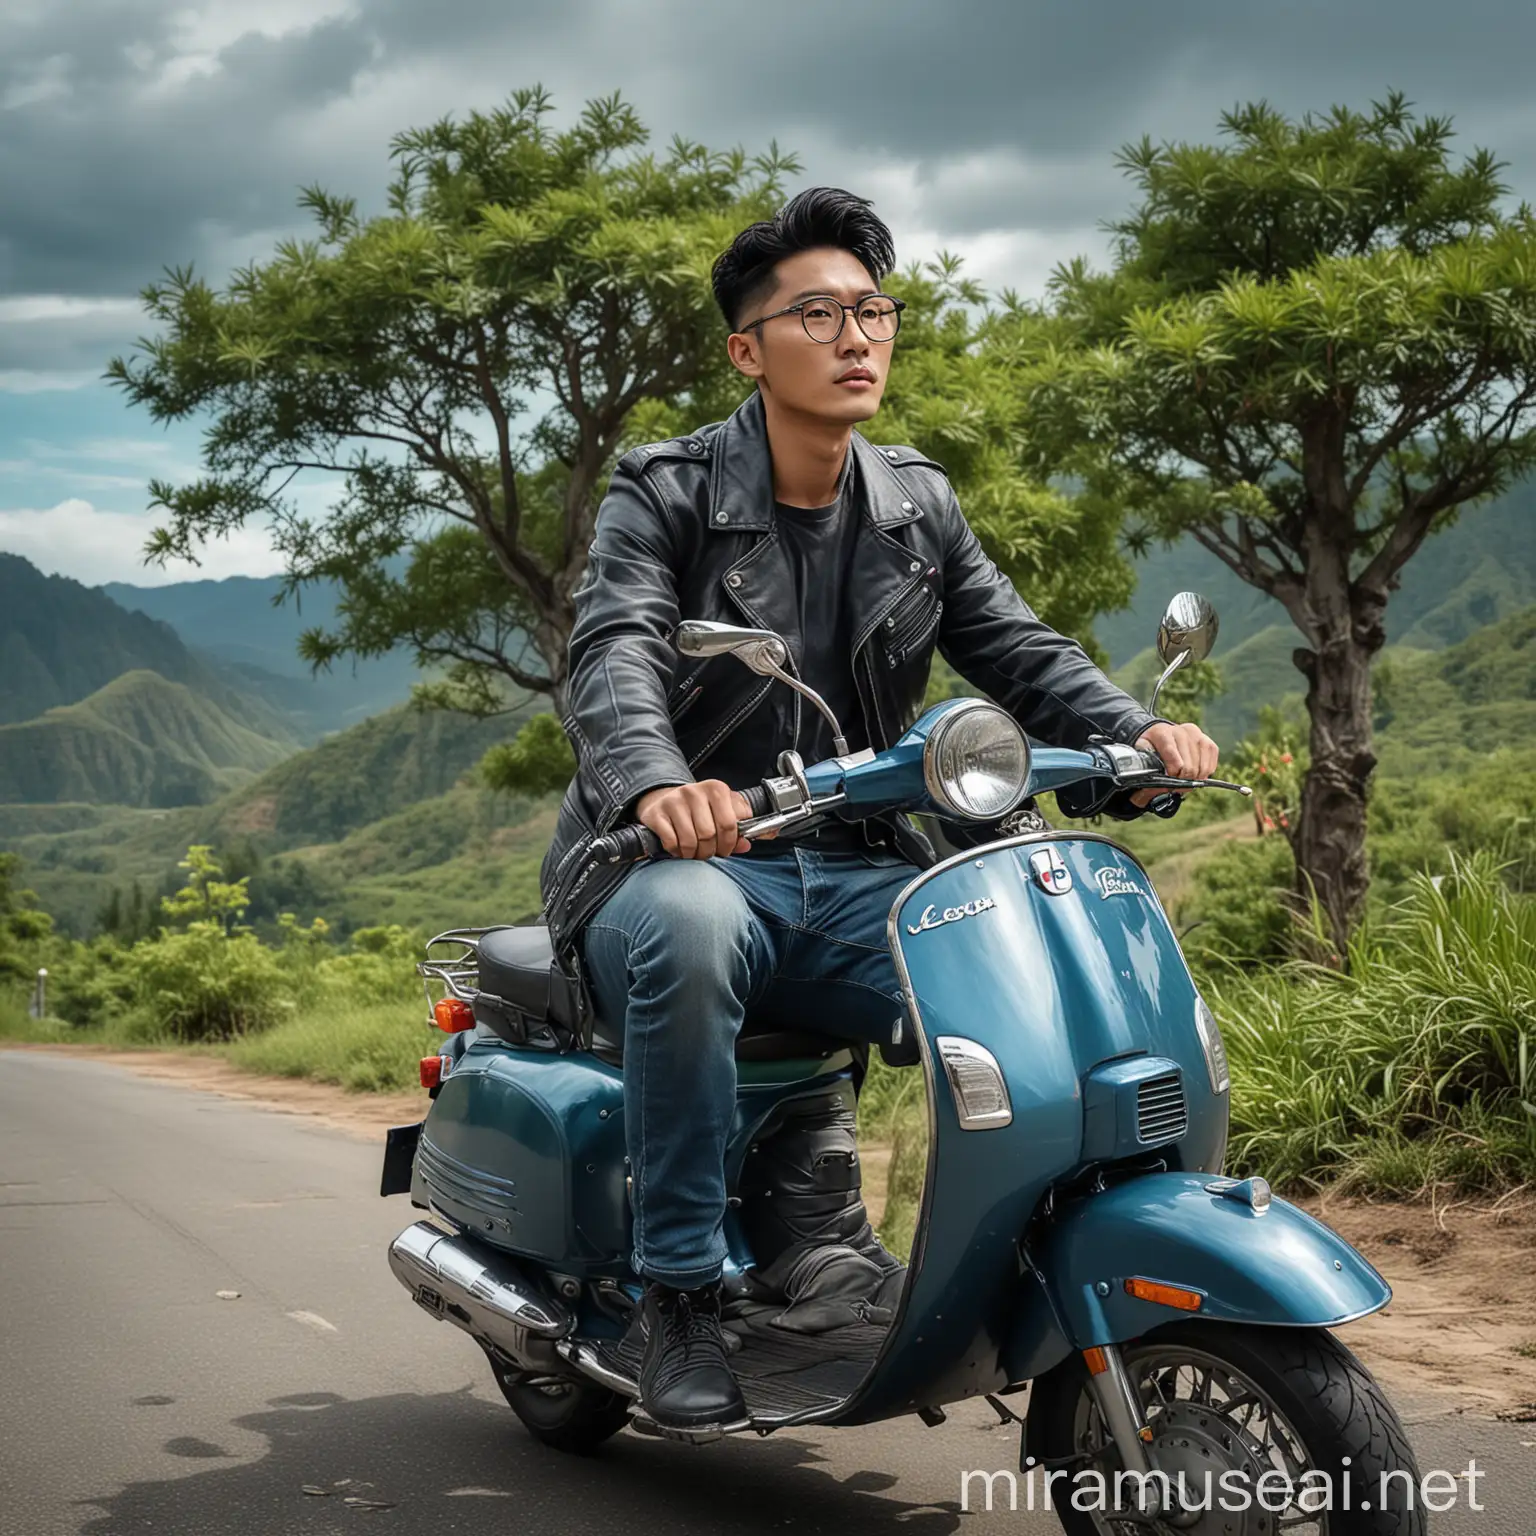 A handsome Korean man with an undercut hairstyle and black glasses is wearing a black leather jacket and medium-washed Levi's, sitting on a Vespa motorcycle facing the camera full body, with a lush green tree and bright blue cloudy HDR extreme background, under Mount Bromo in Indonesia, original realistic face